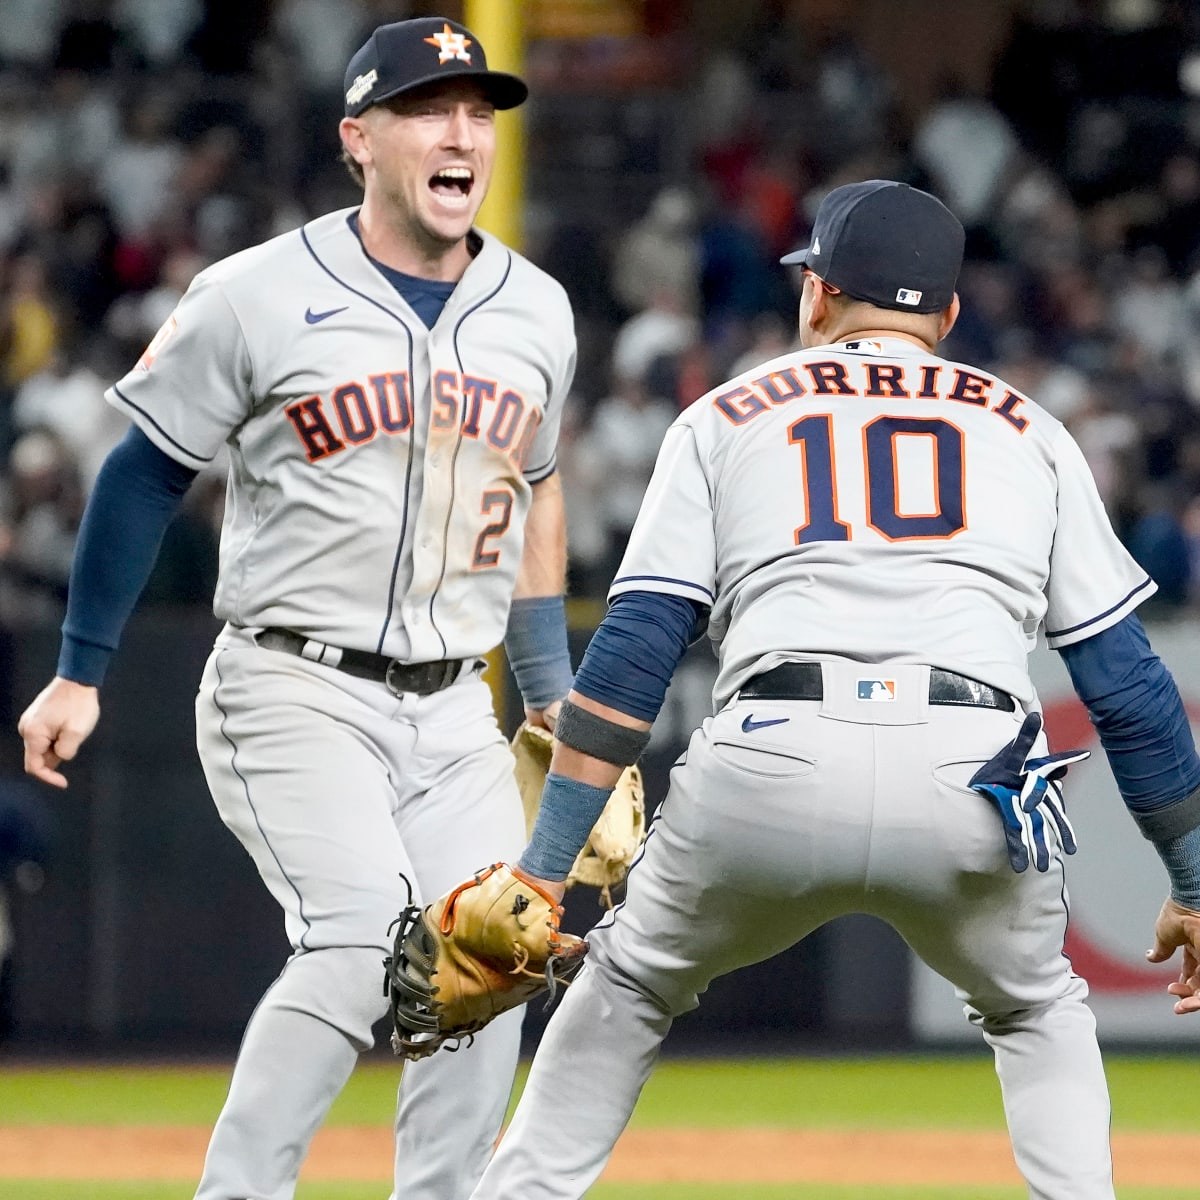 The stage is set. The Houston Astros will take on the Minnesota